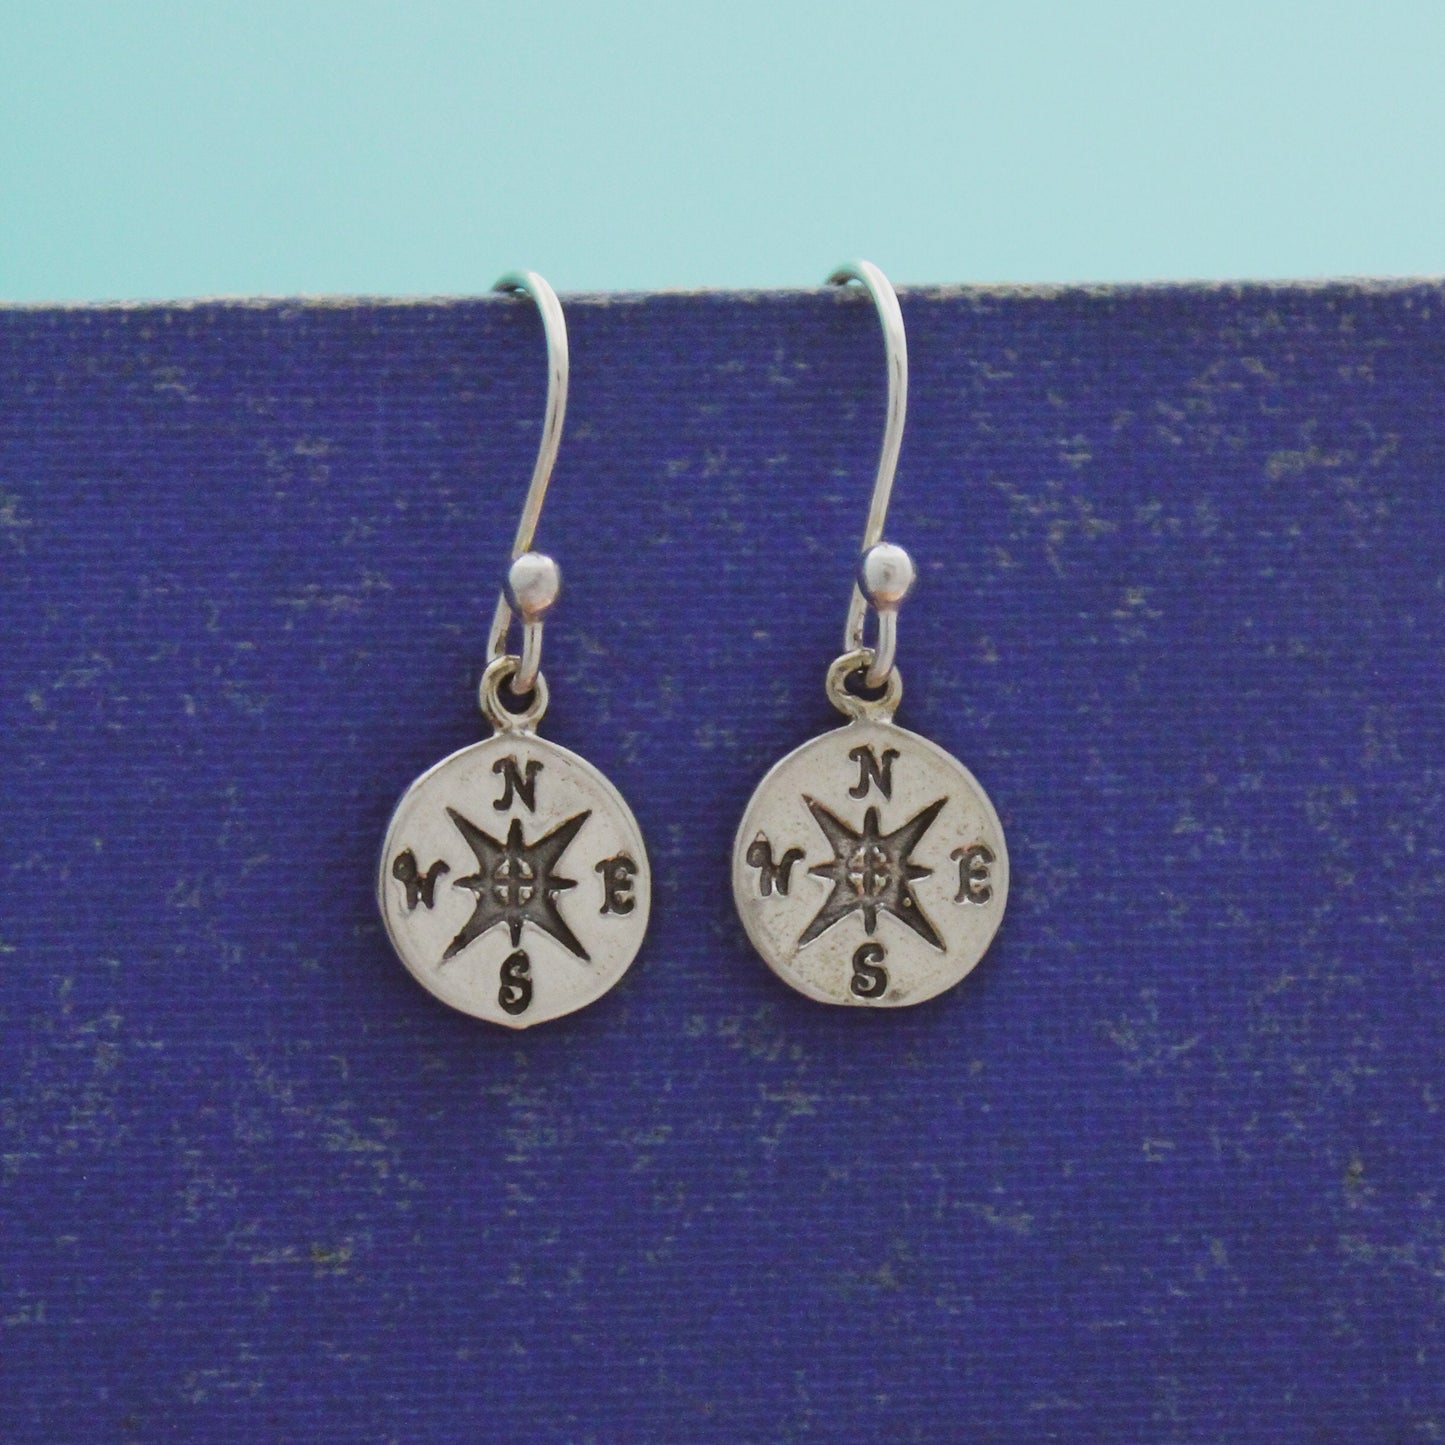 Cute Compass Earrings, Sterling Silver Compass Rose Earrings, Graduation Gift, Compass Jewelry, Grad Gifts for Her, Dainty Silver Earrings